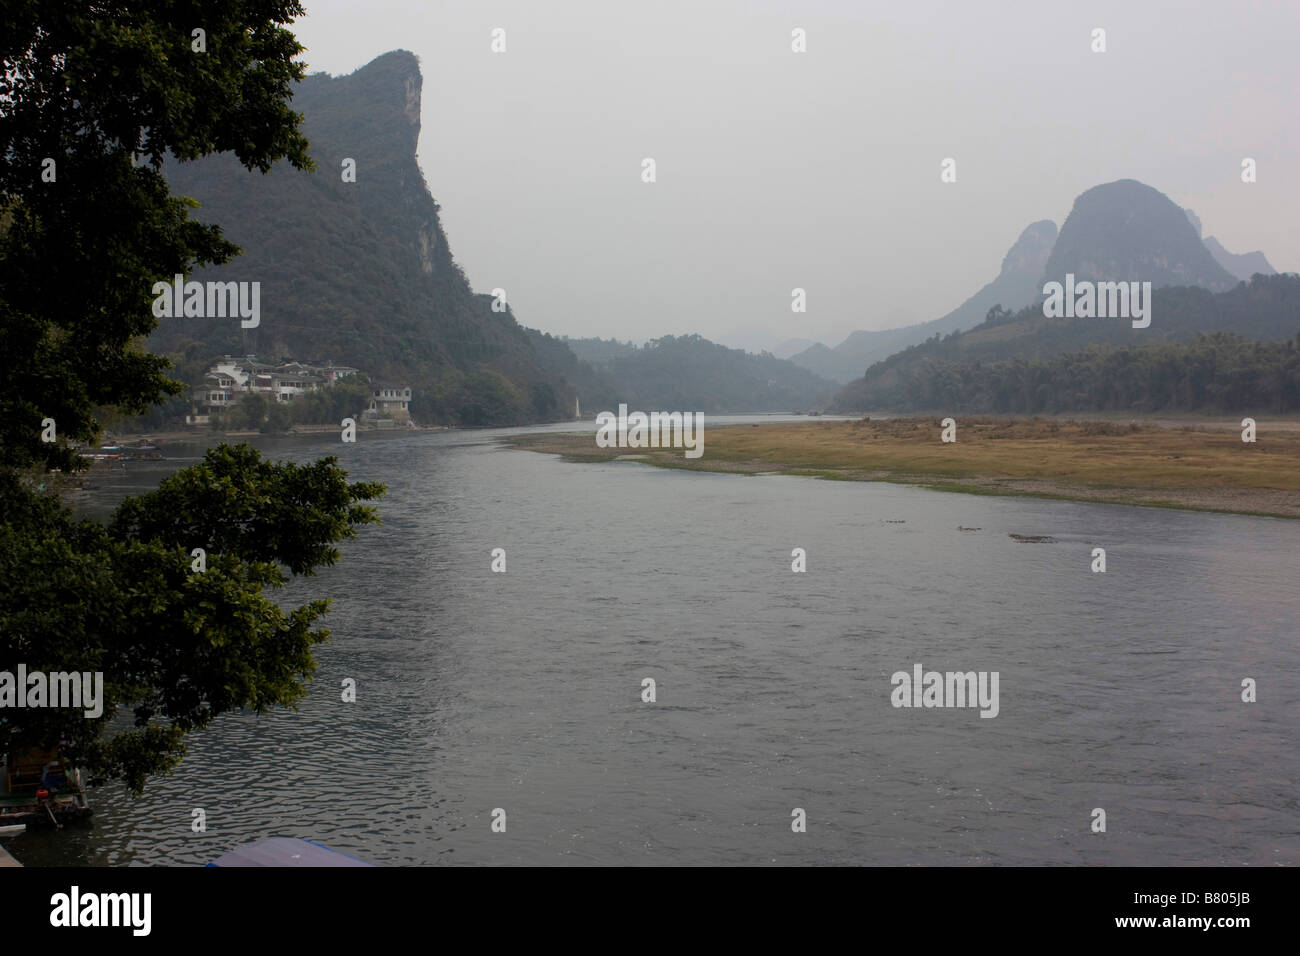 The dreamy landscape of the Li River, Yangshuo, China,  as you cruise along the river in a bamboo raft on a winter day Stock Photo